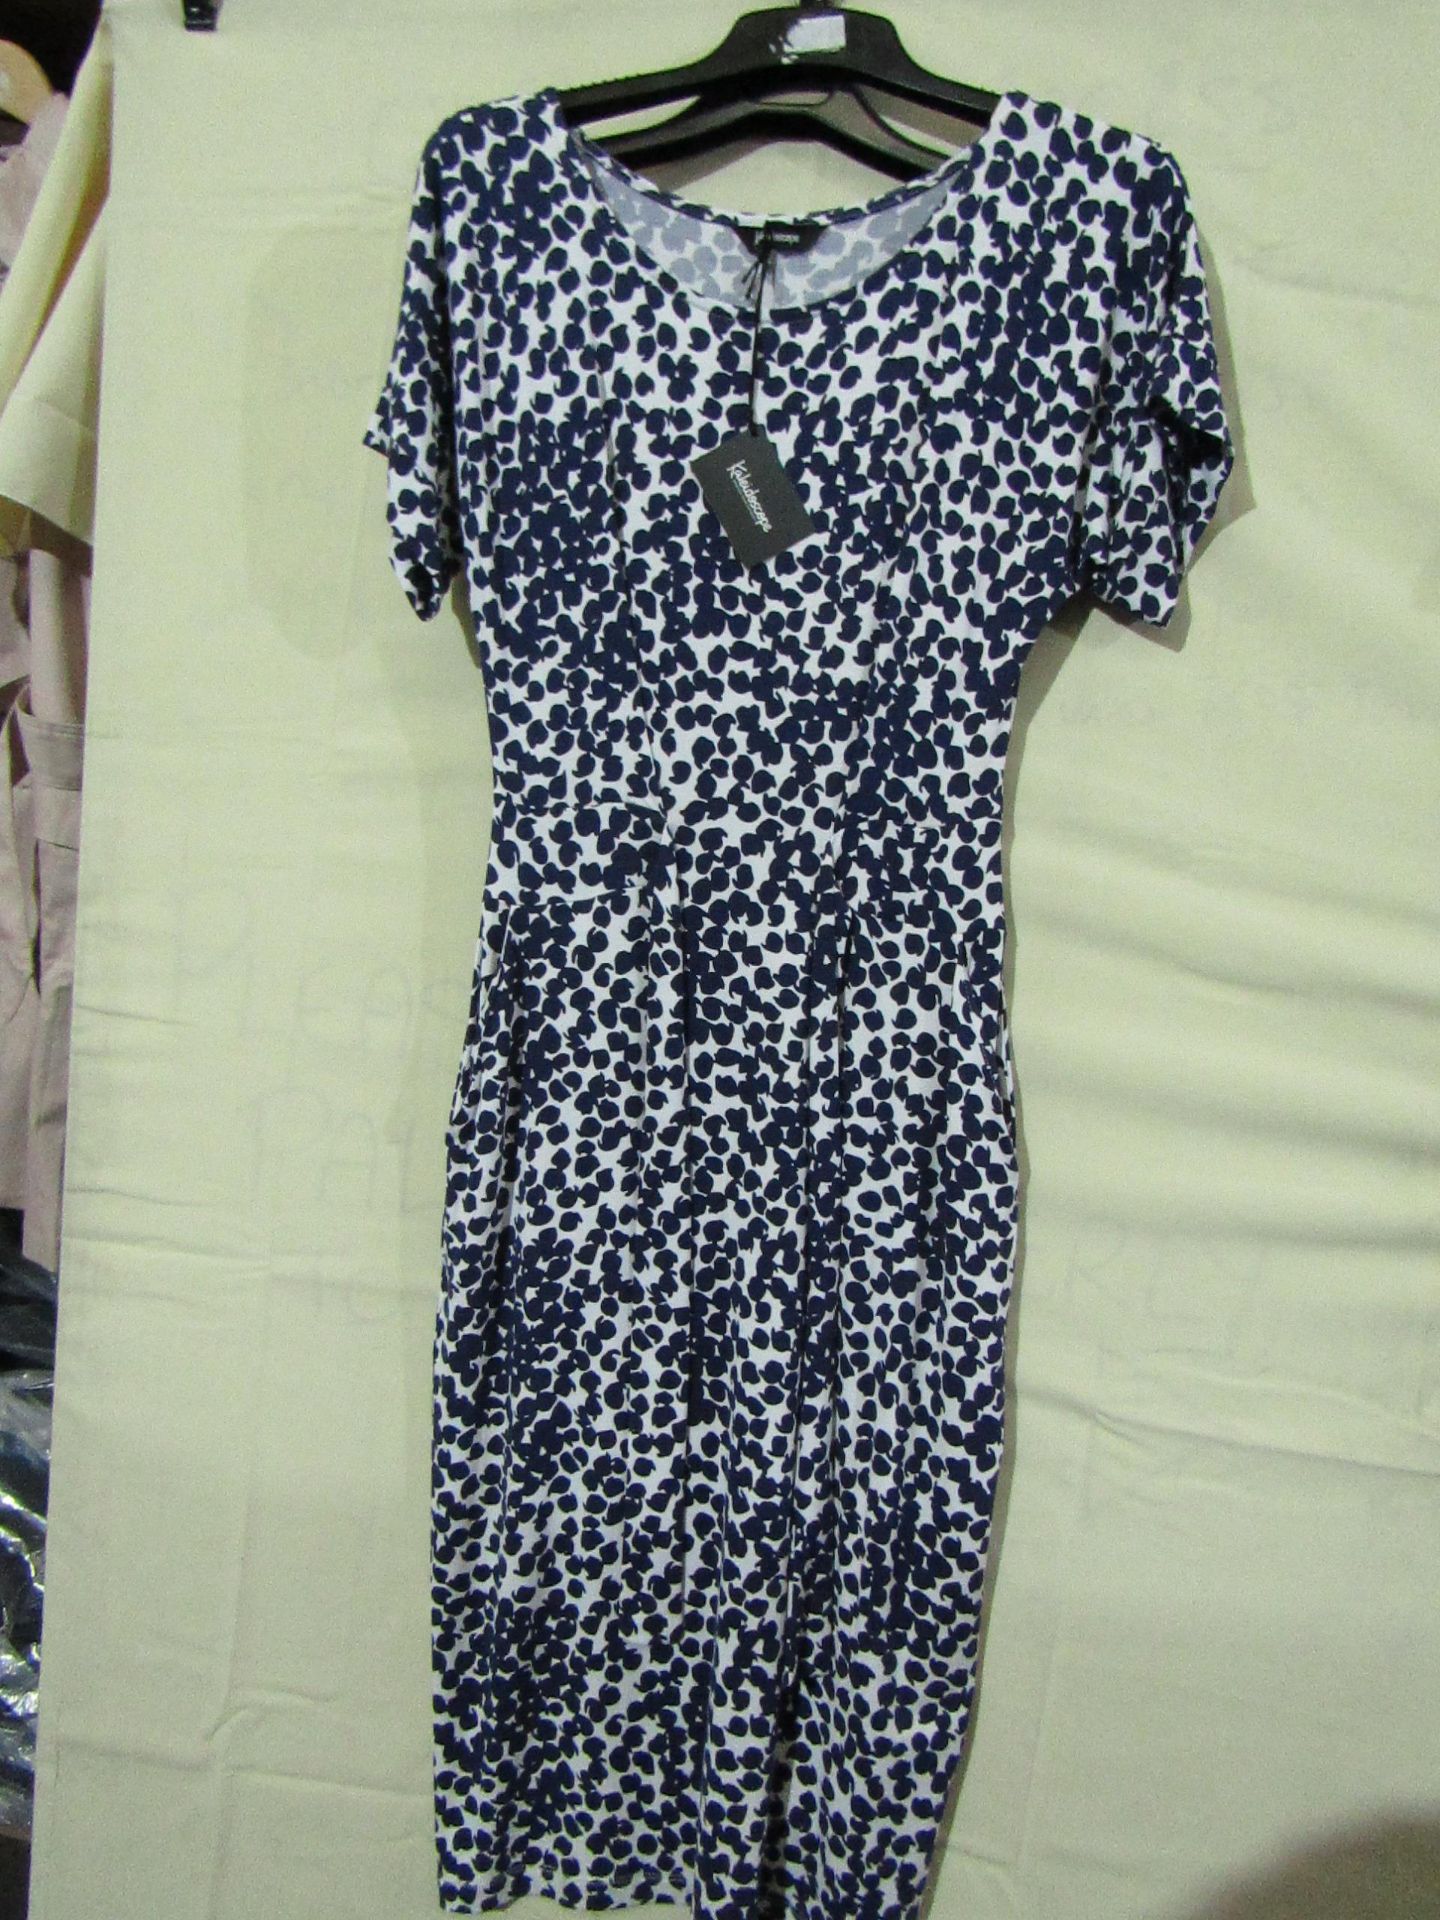 Kaleidoscope women's dress, size 12, new and packaged.